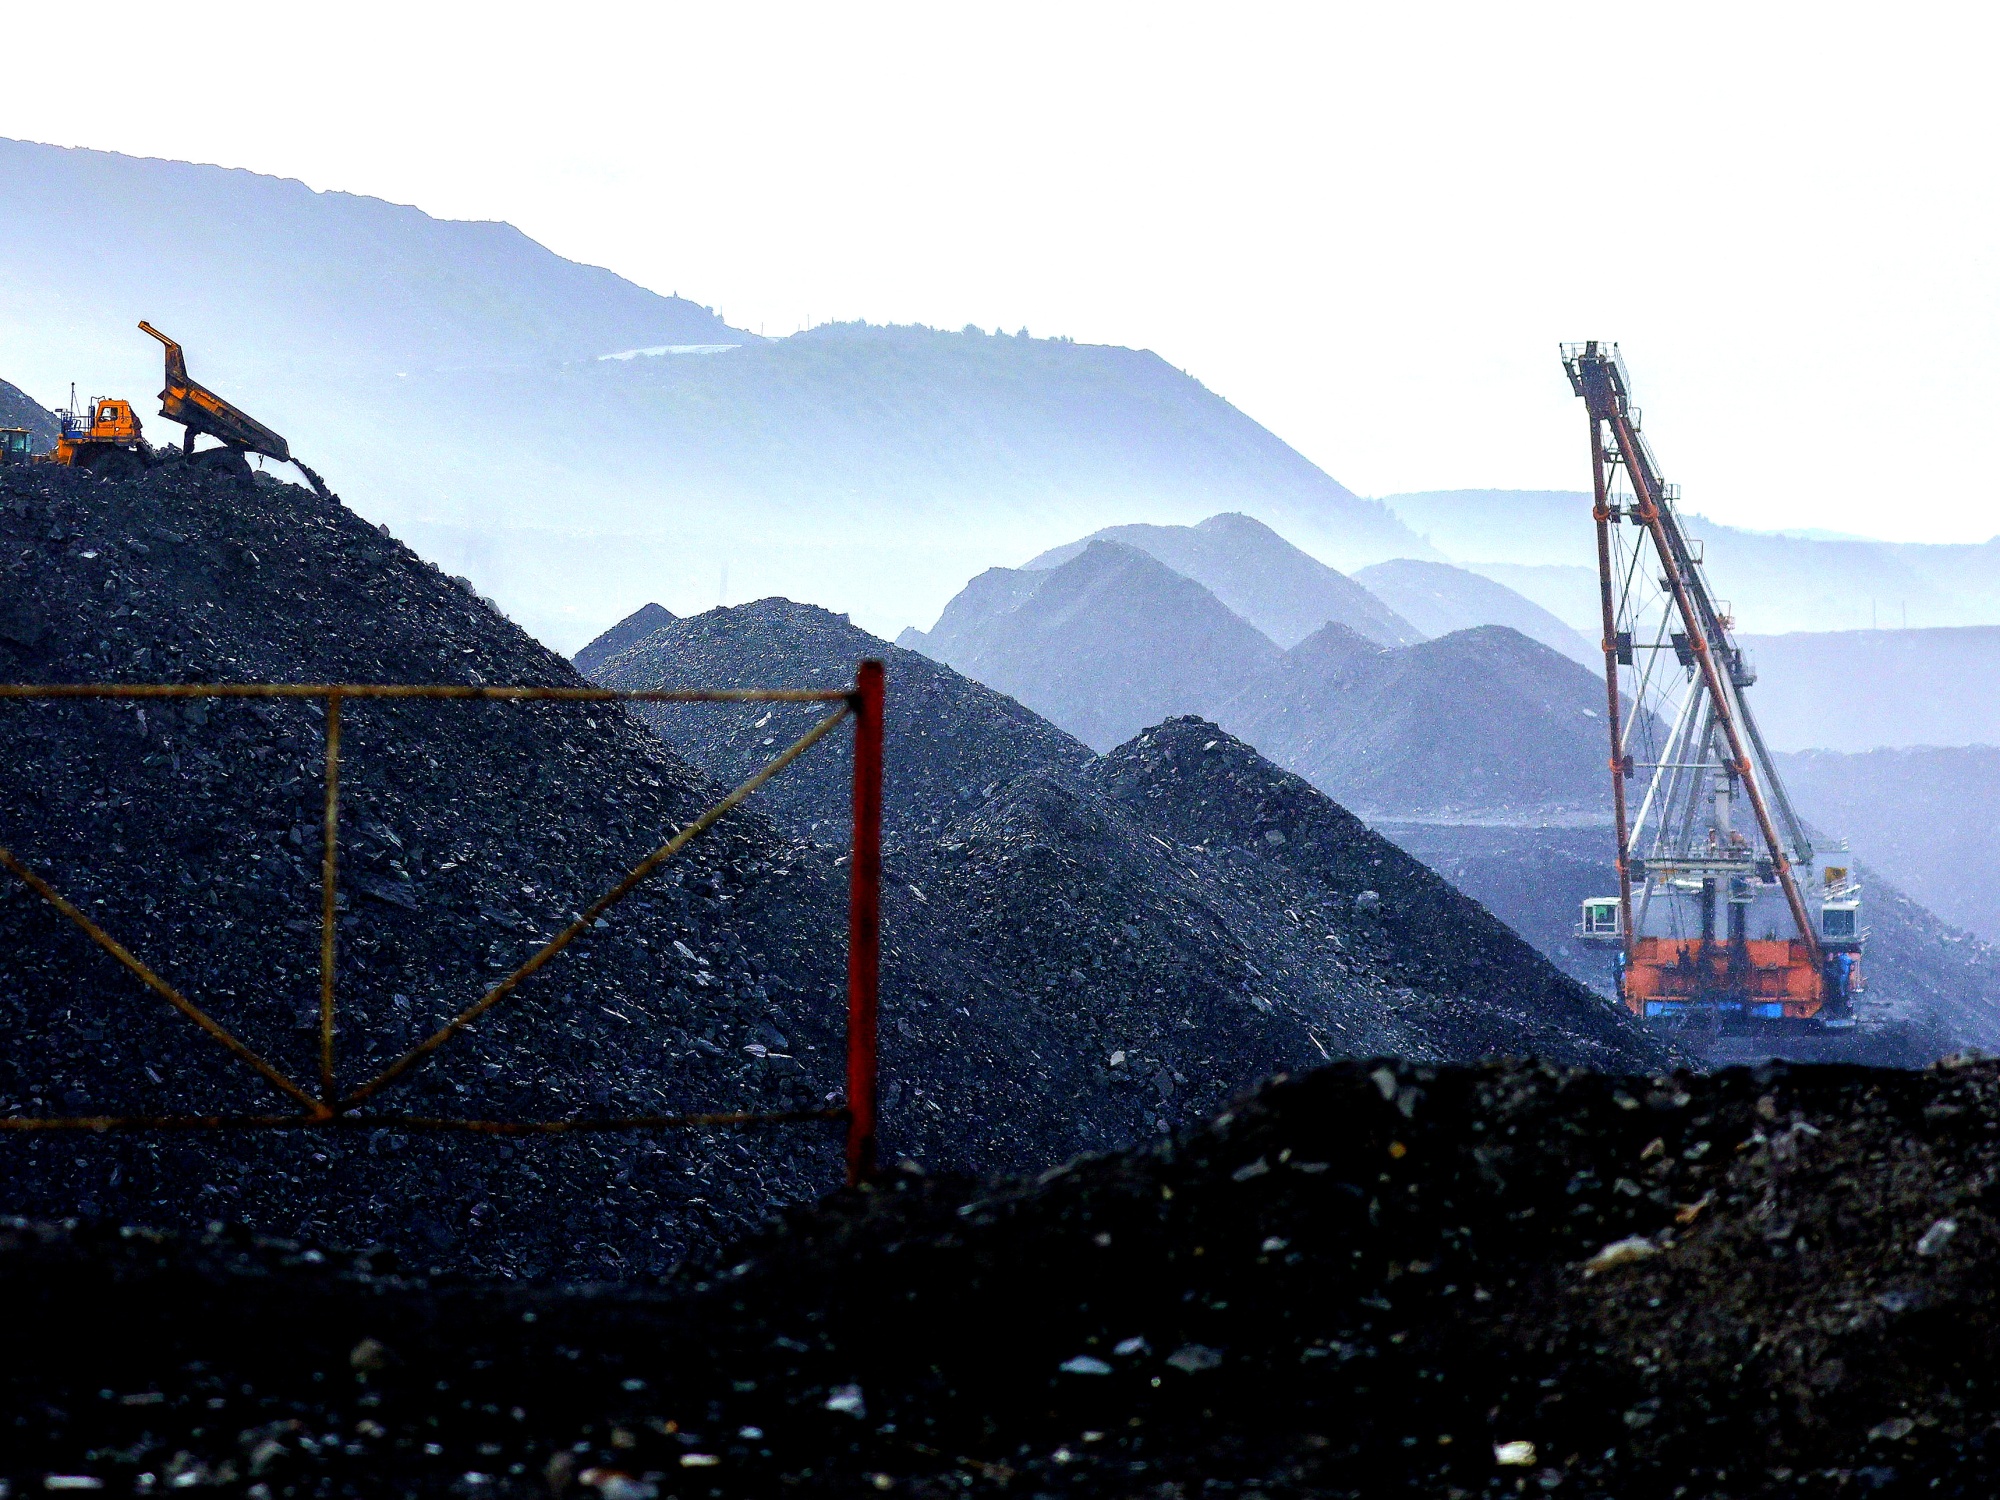 Coal still has a powerful grip on China, as does oil and gas on the U.S.